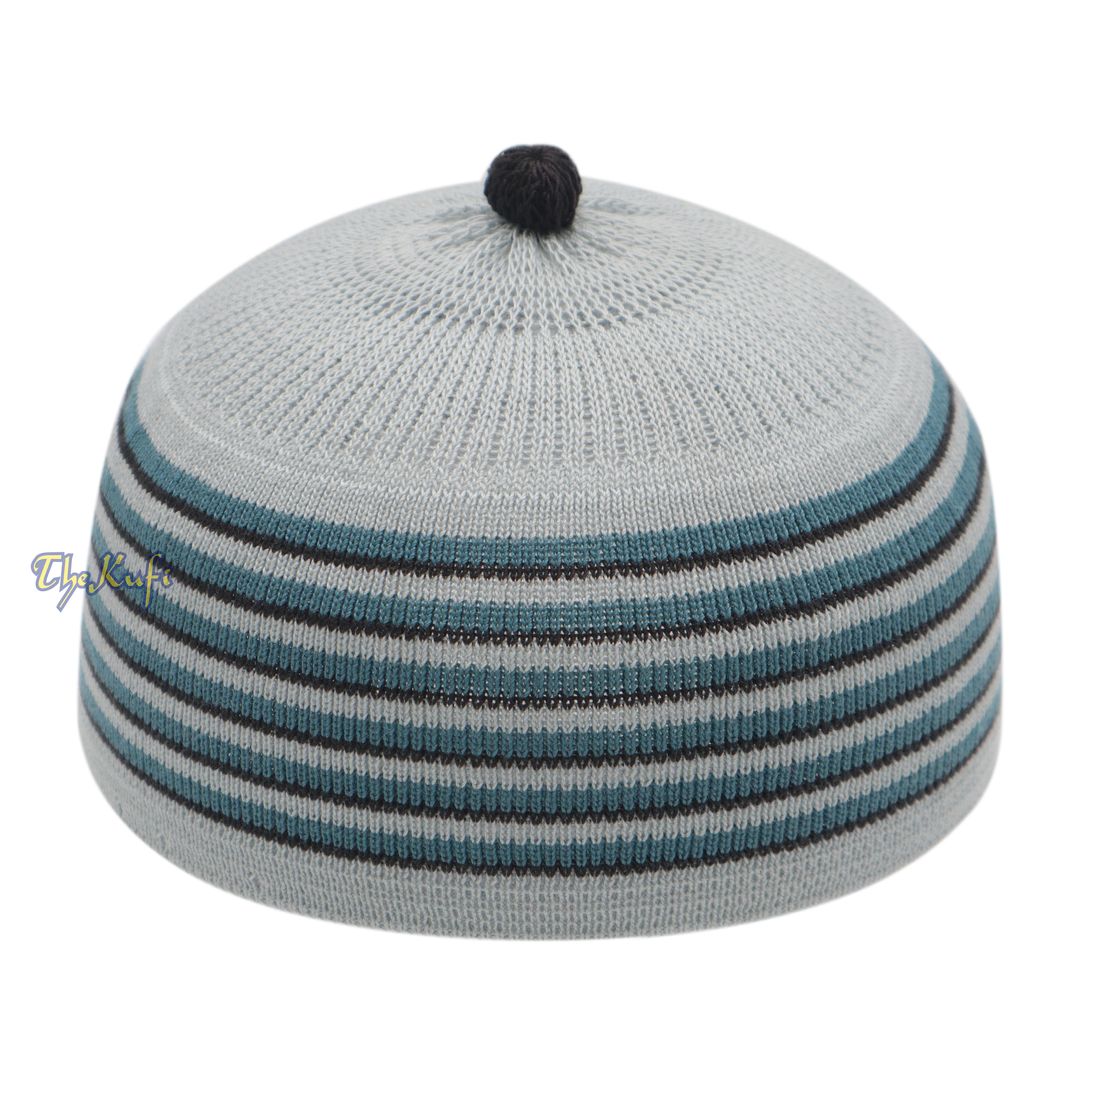 Light Grey with Turquoise and Black Lines Baby/Infant Kufi Pompom Beanie